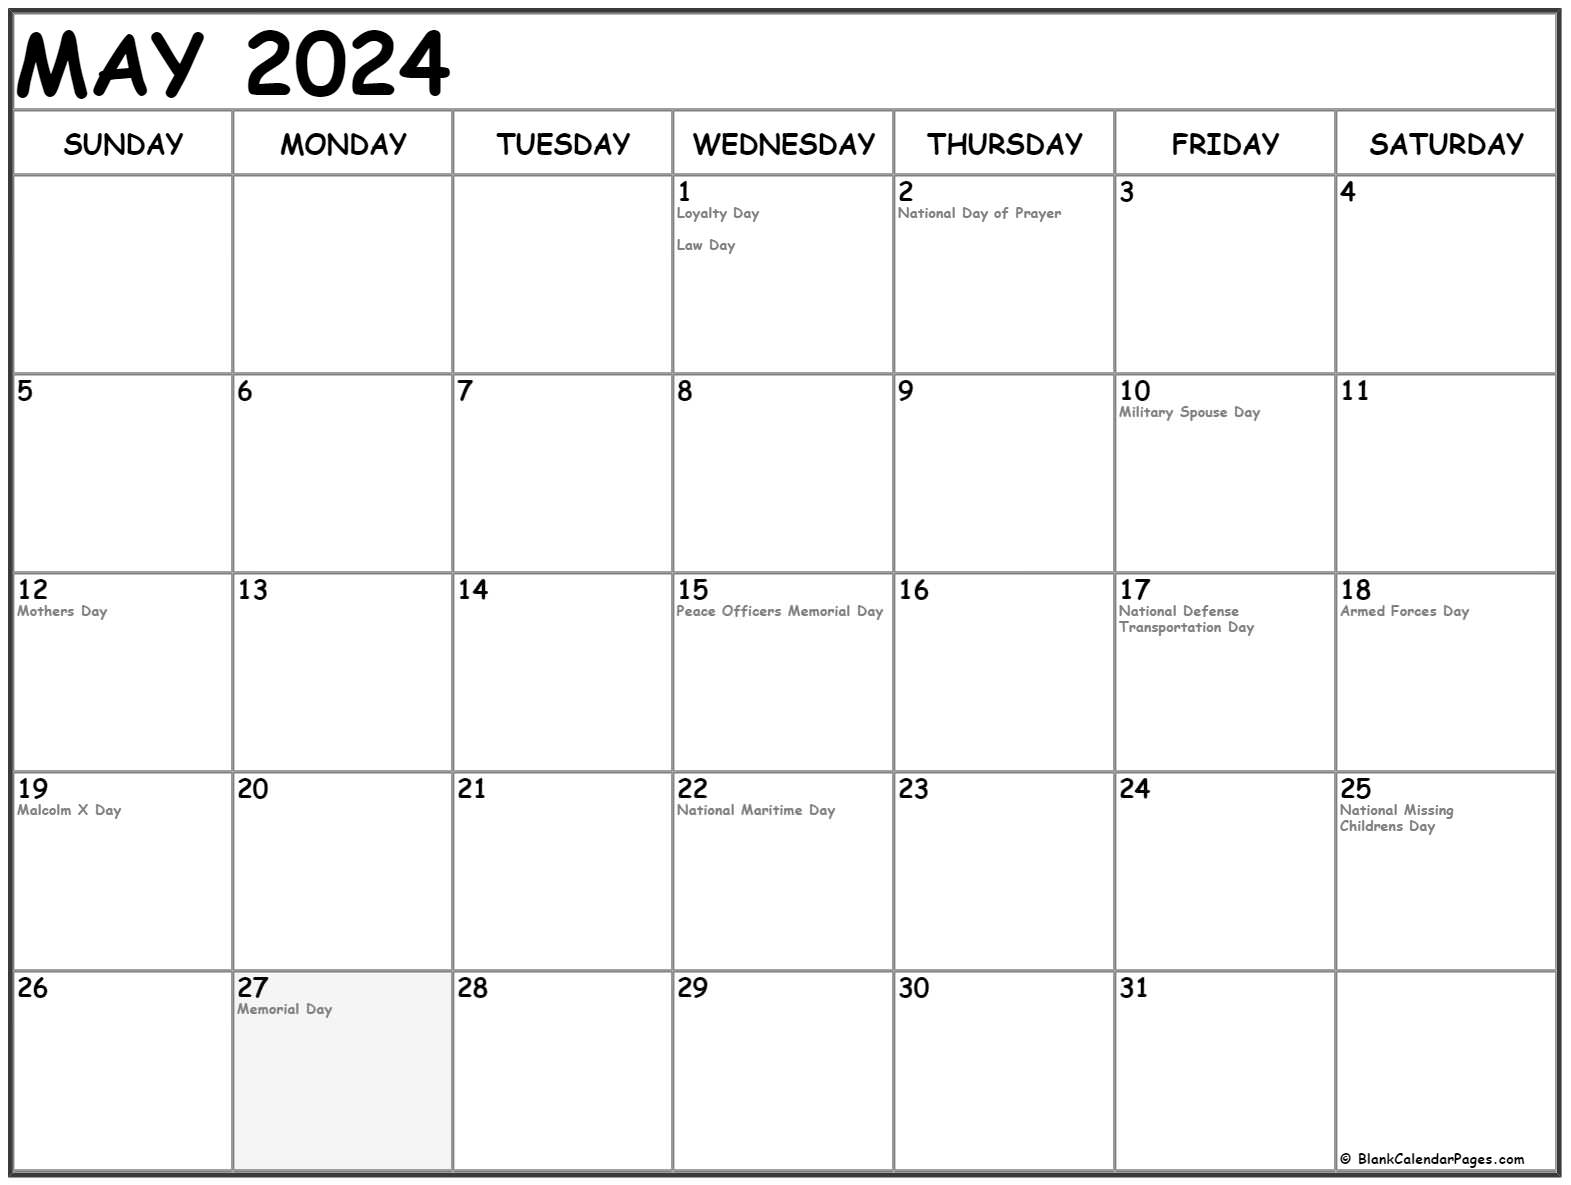 may-2023-with-holidays-calendar